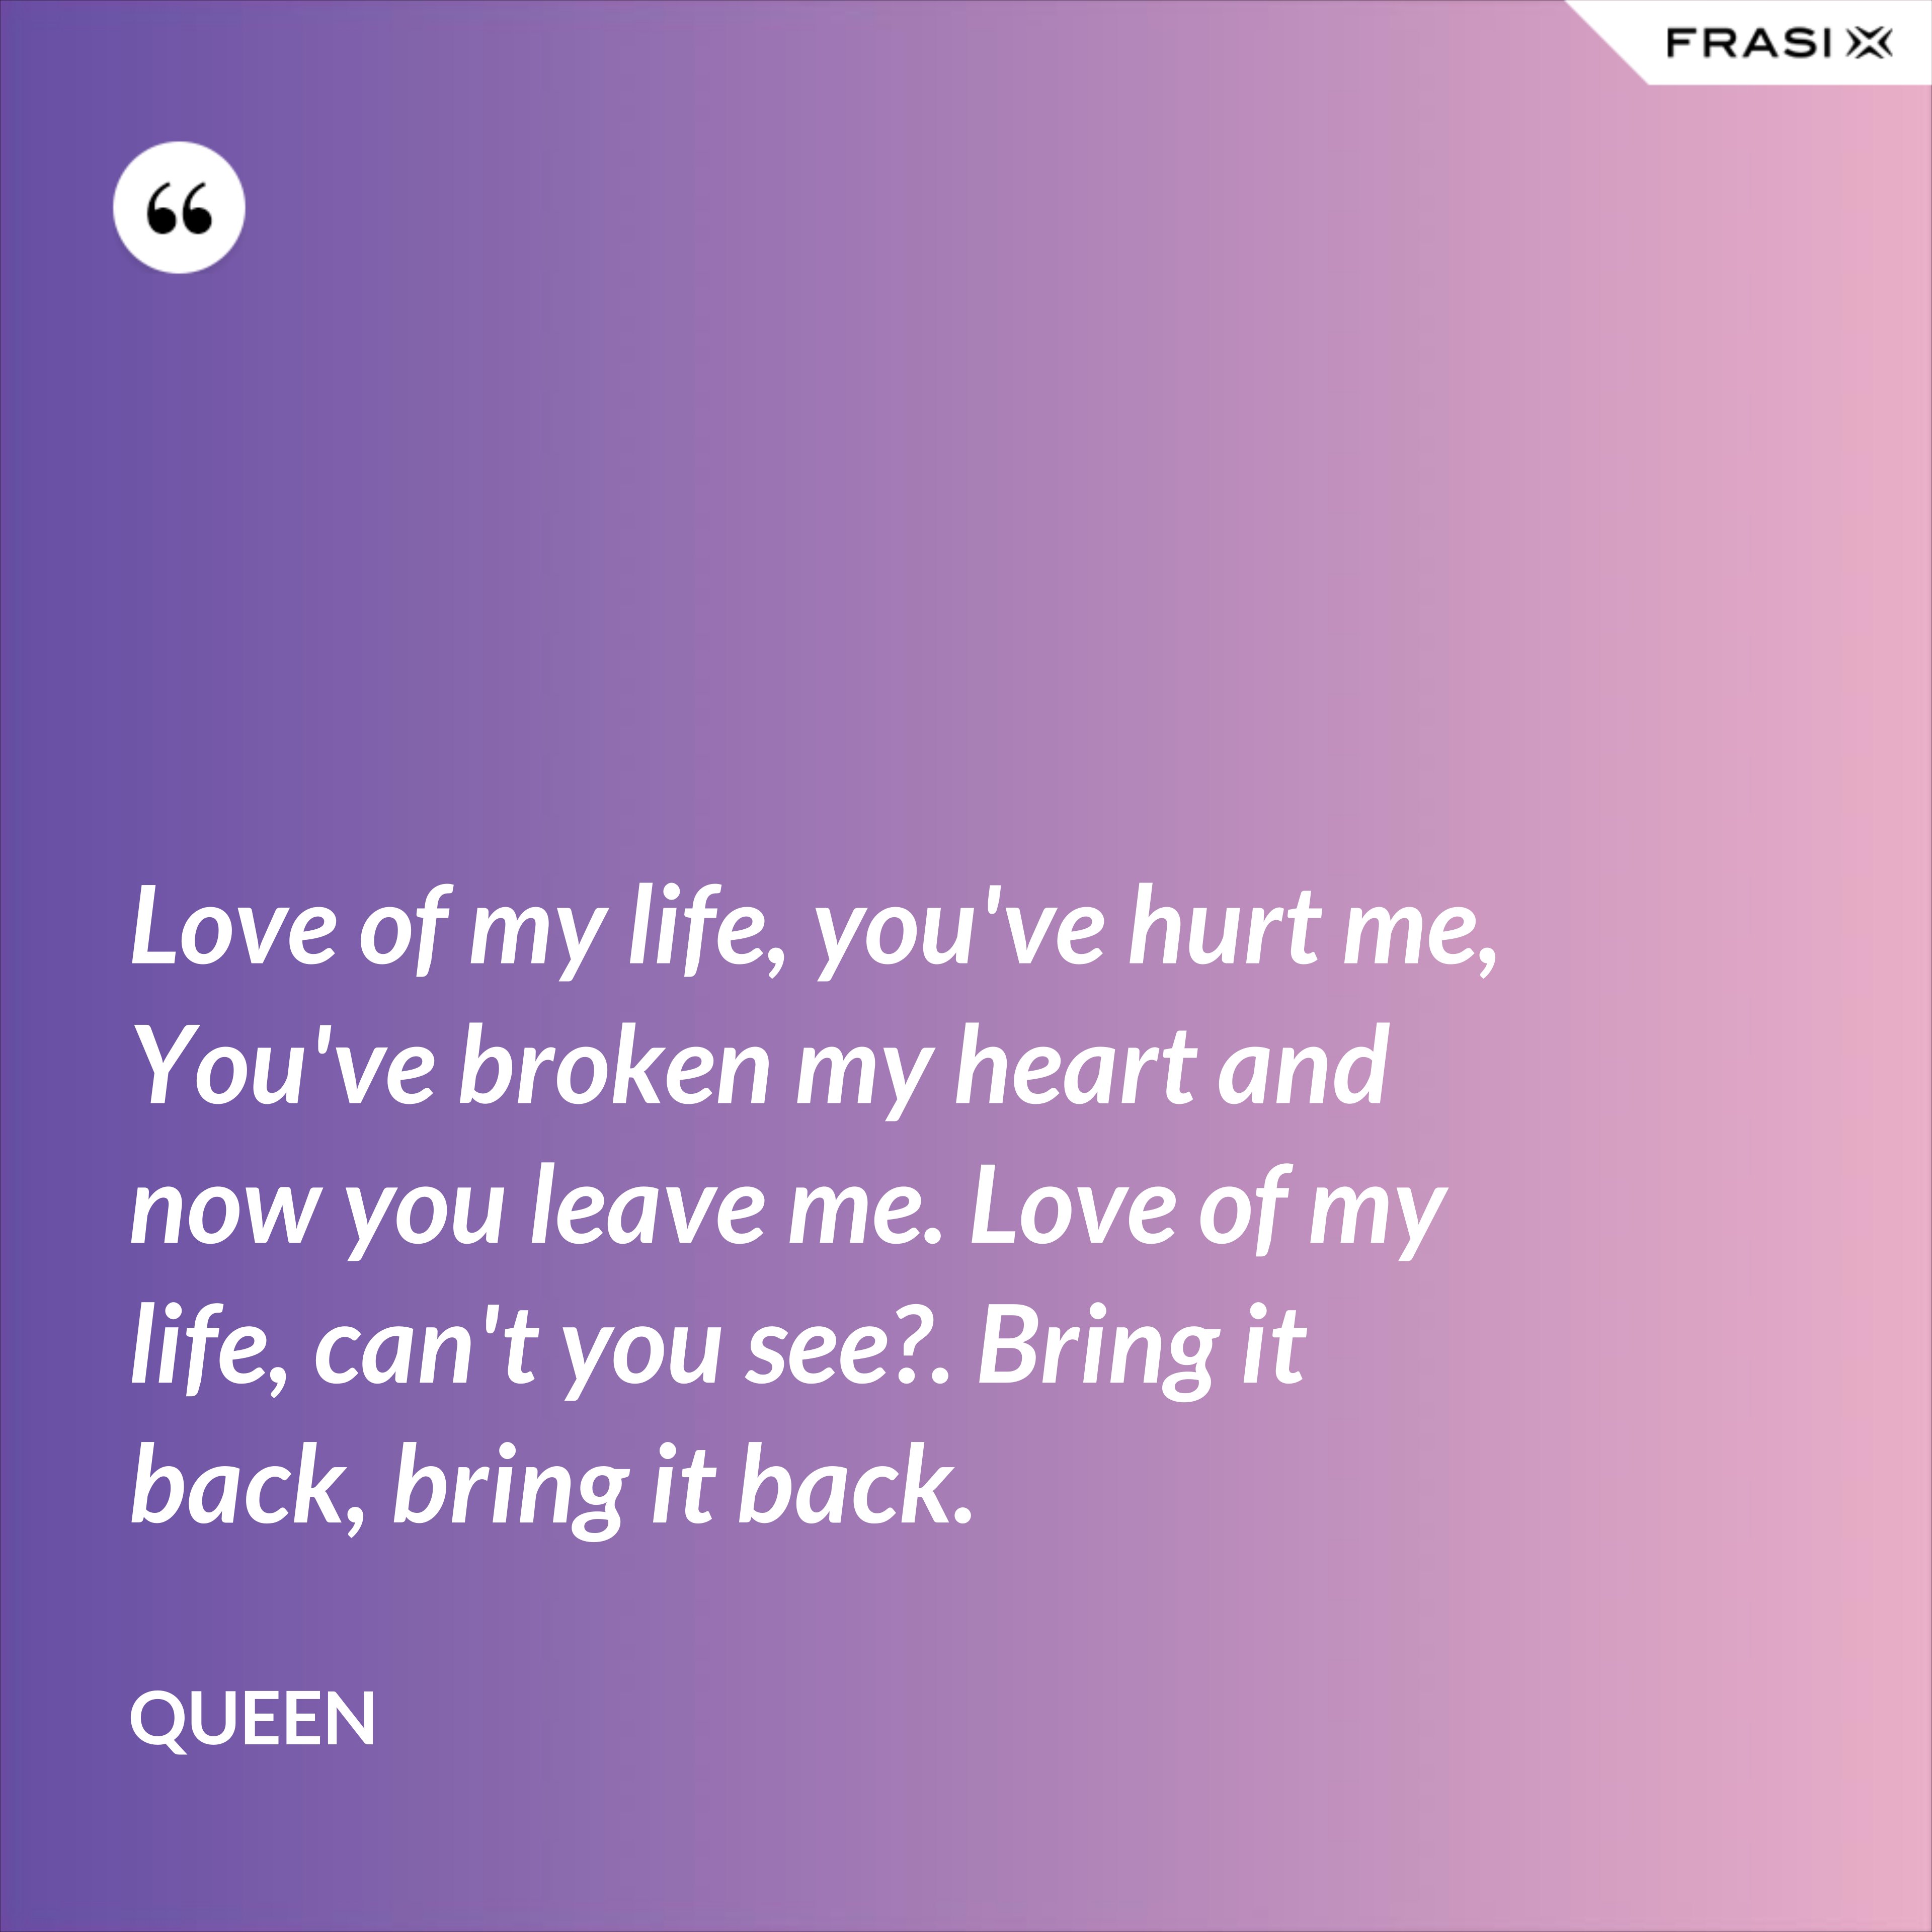 Love of my life, you've hurt me, You've broken my heart and now you leave me. Love of my life, can't you see?. Bring it back, bring it back. - Queen